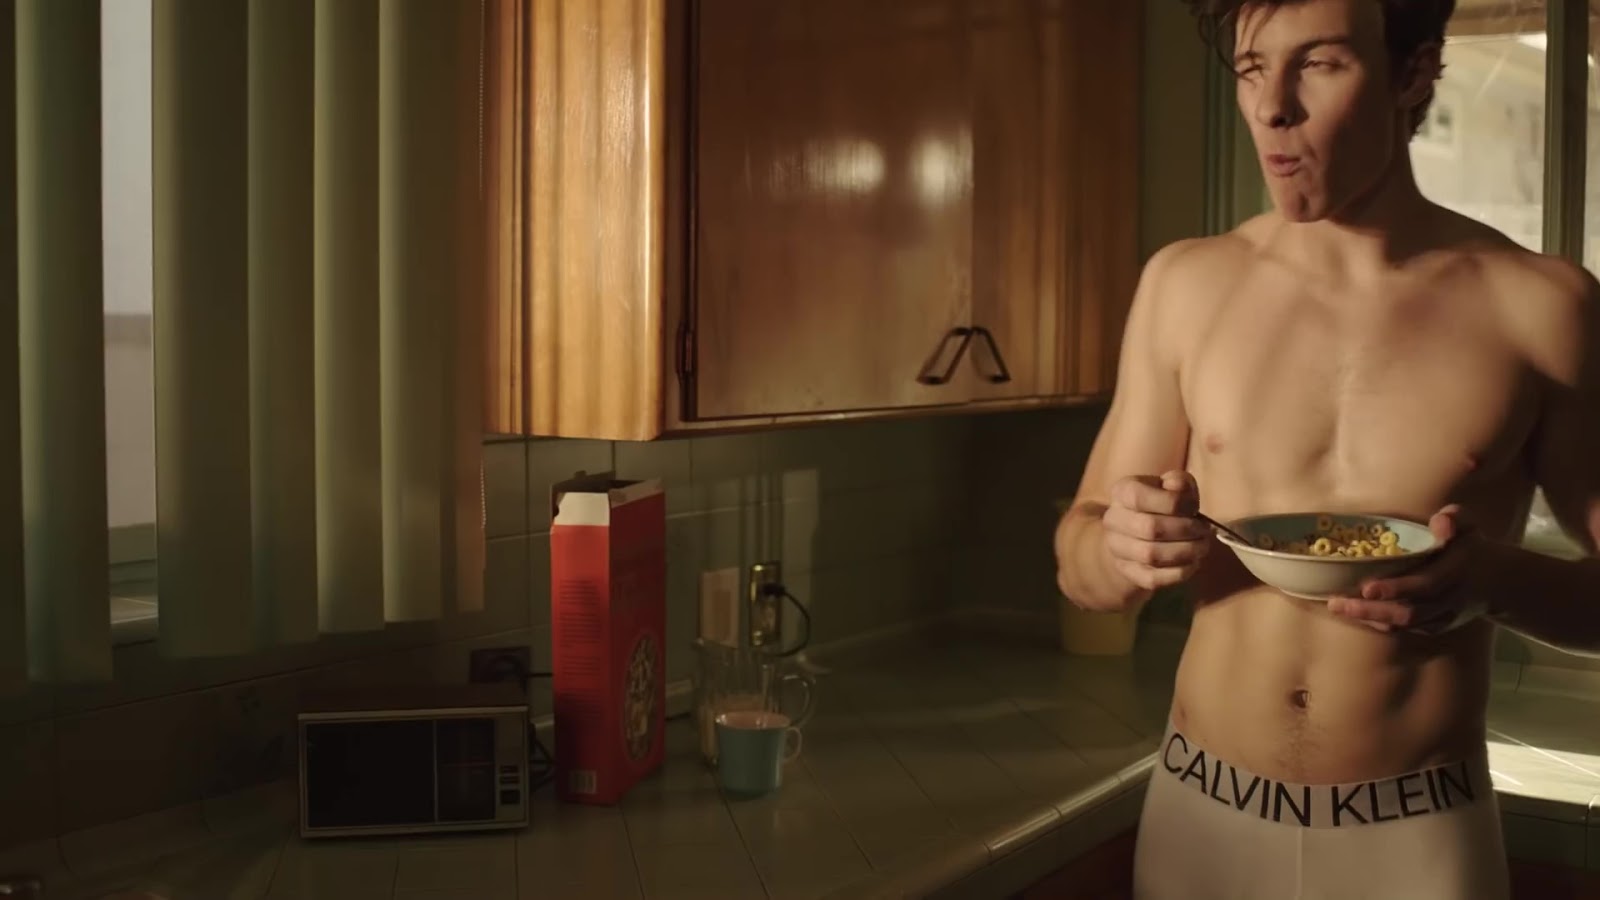 Shawn Mendes shirtless in Our Now. #mycalvins.